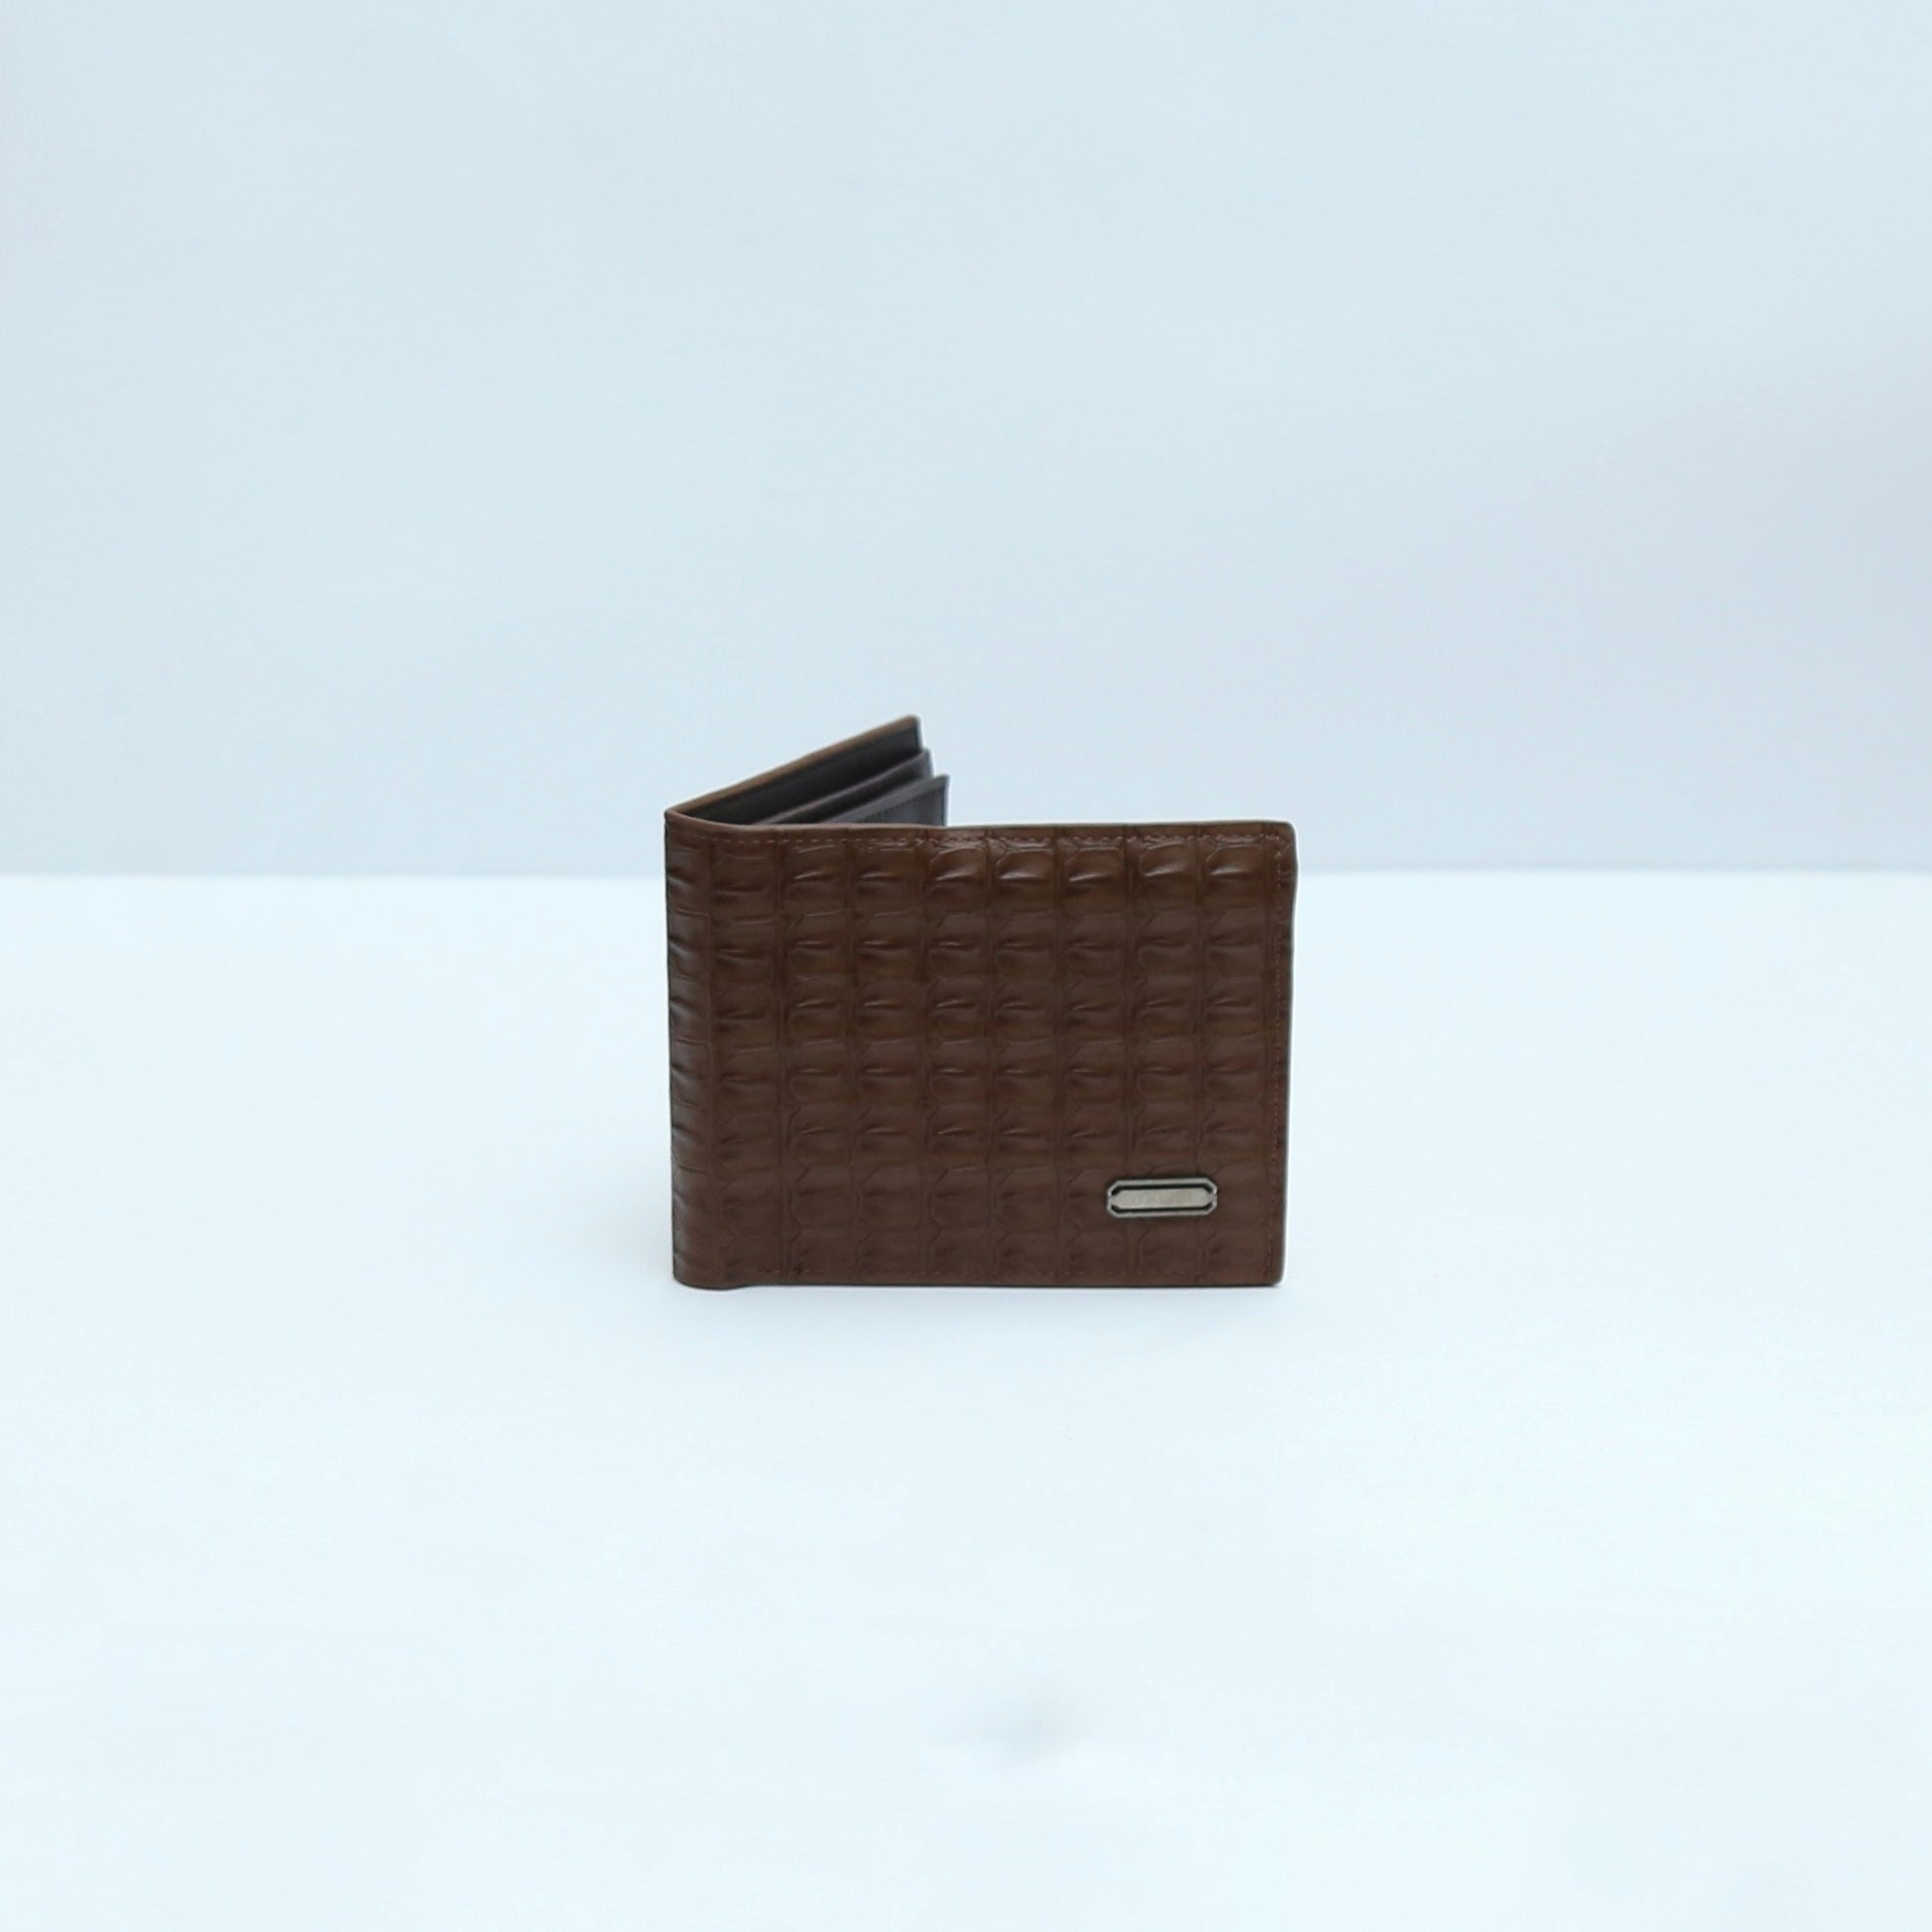 BROWN TEXTURED LEATHER WALLET  LW-730B